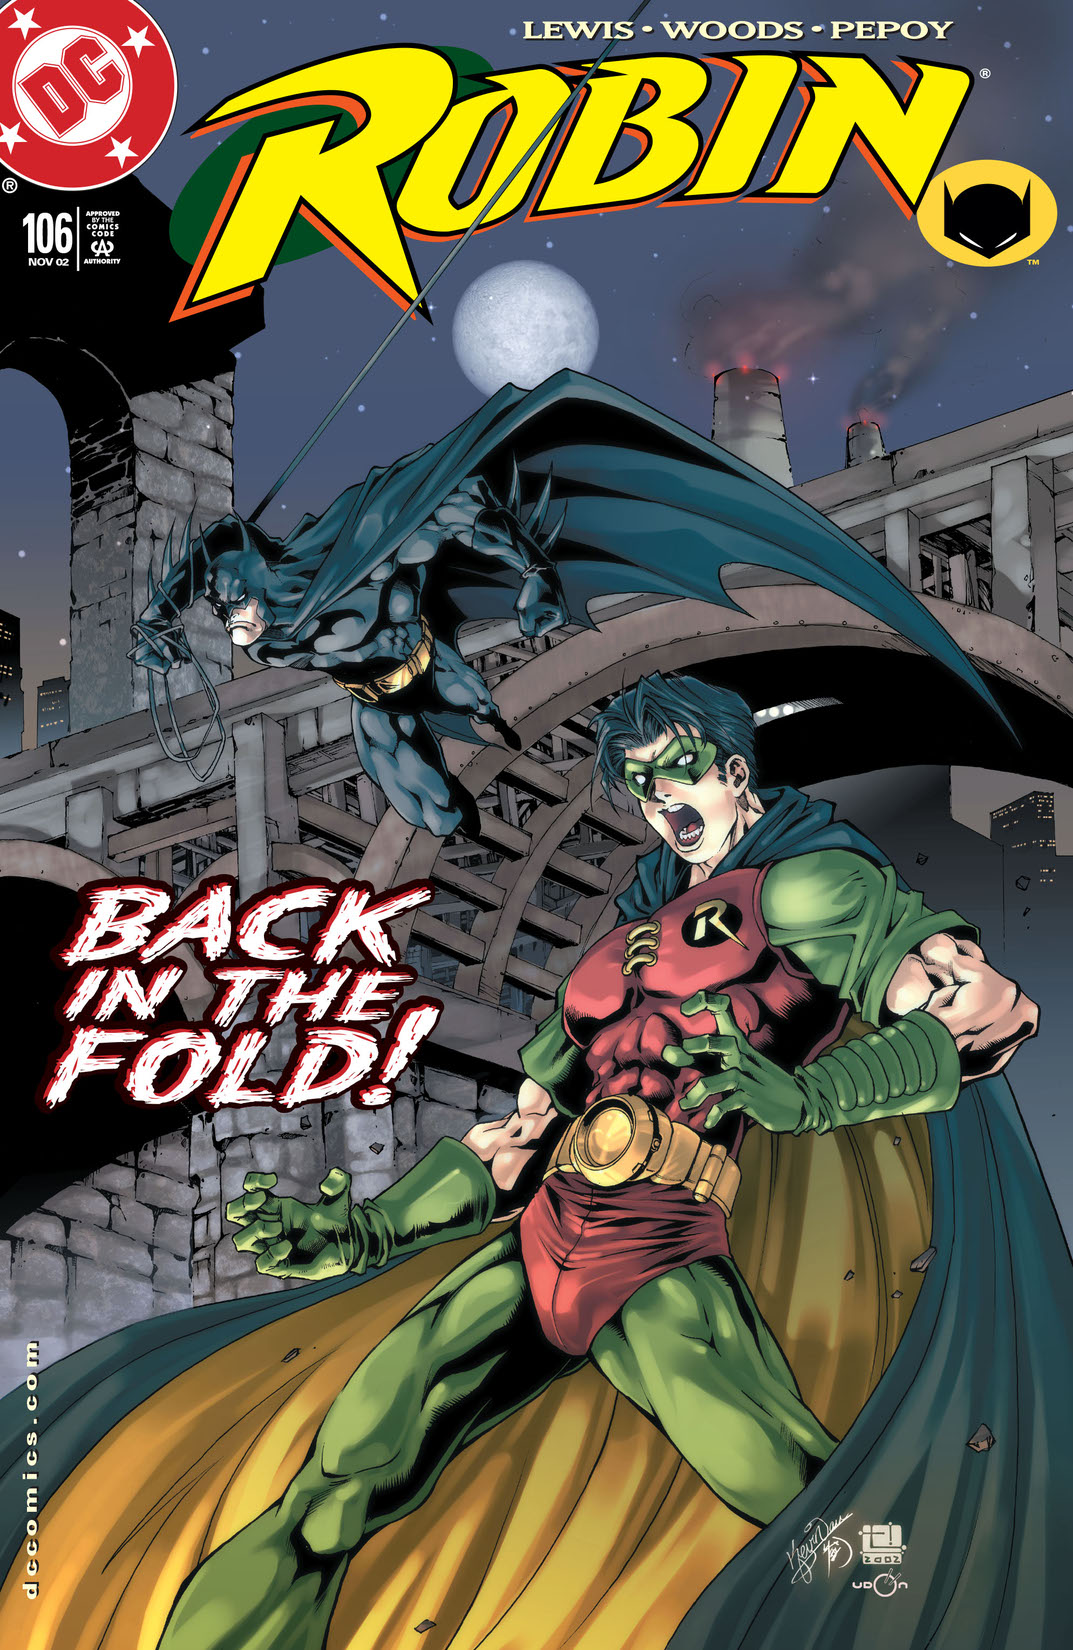 Robin (1993-) #106 preview images